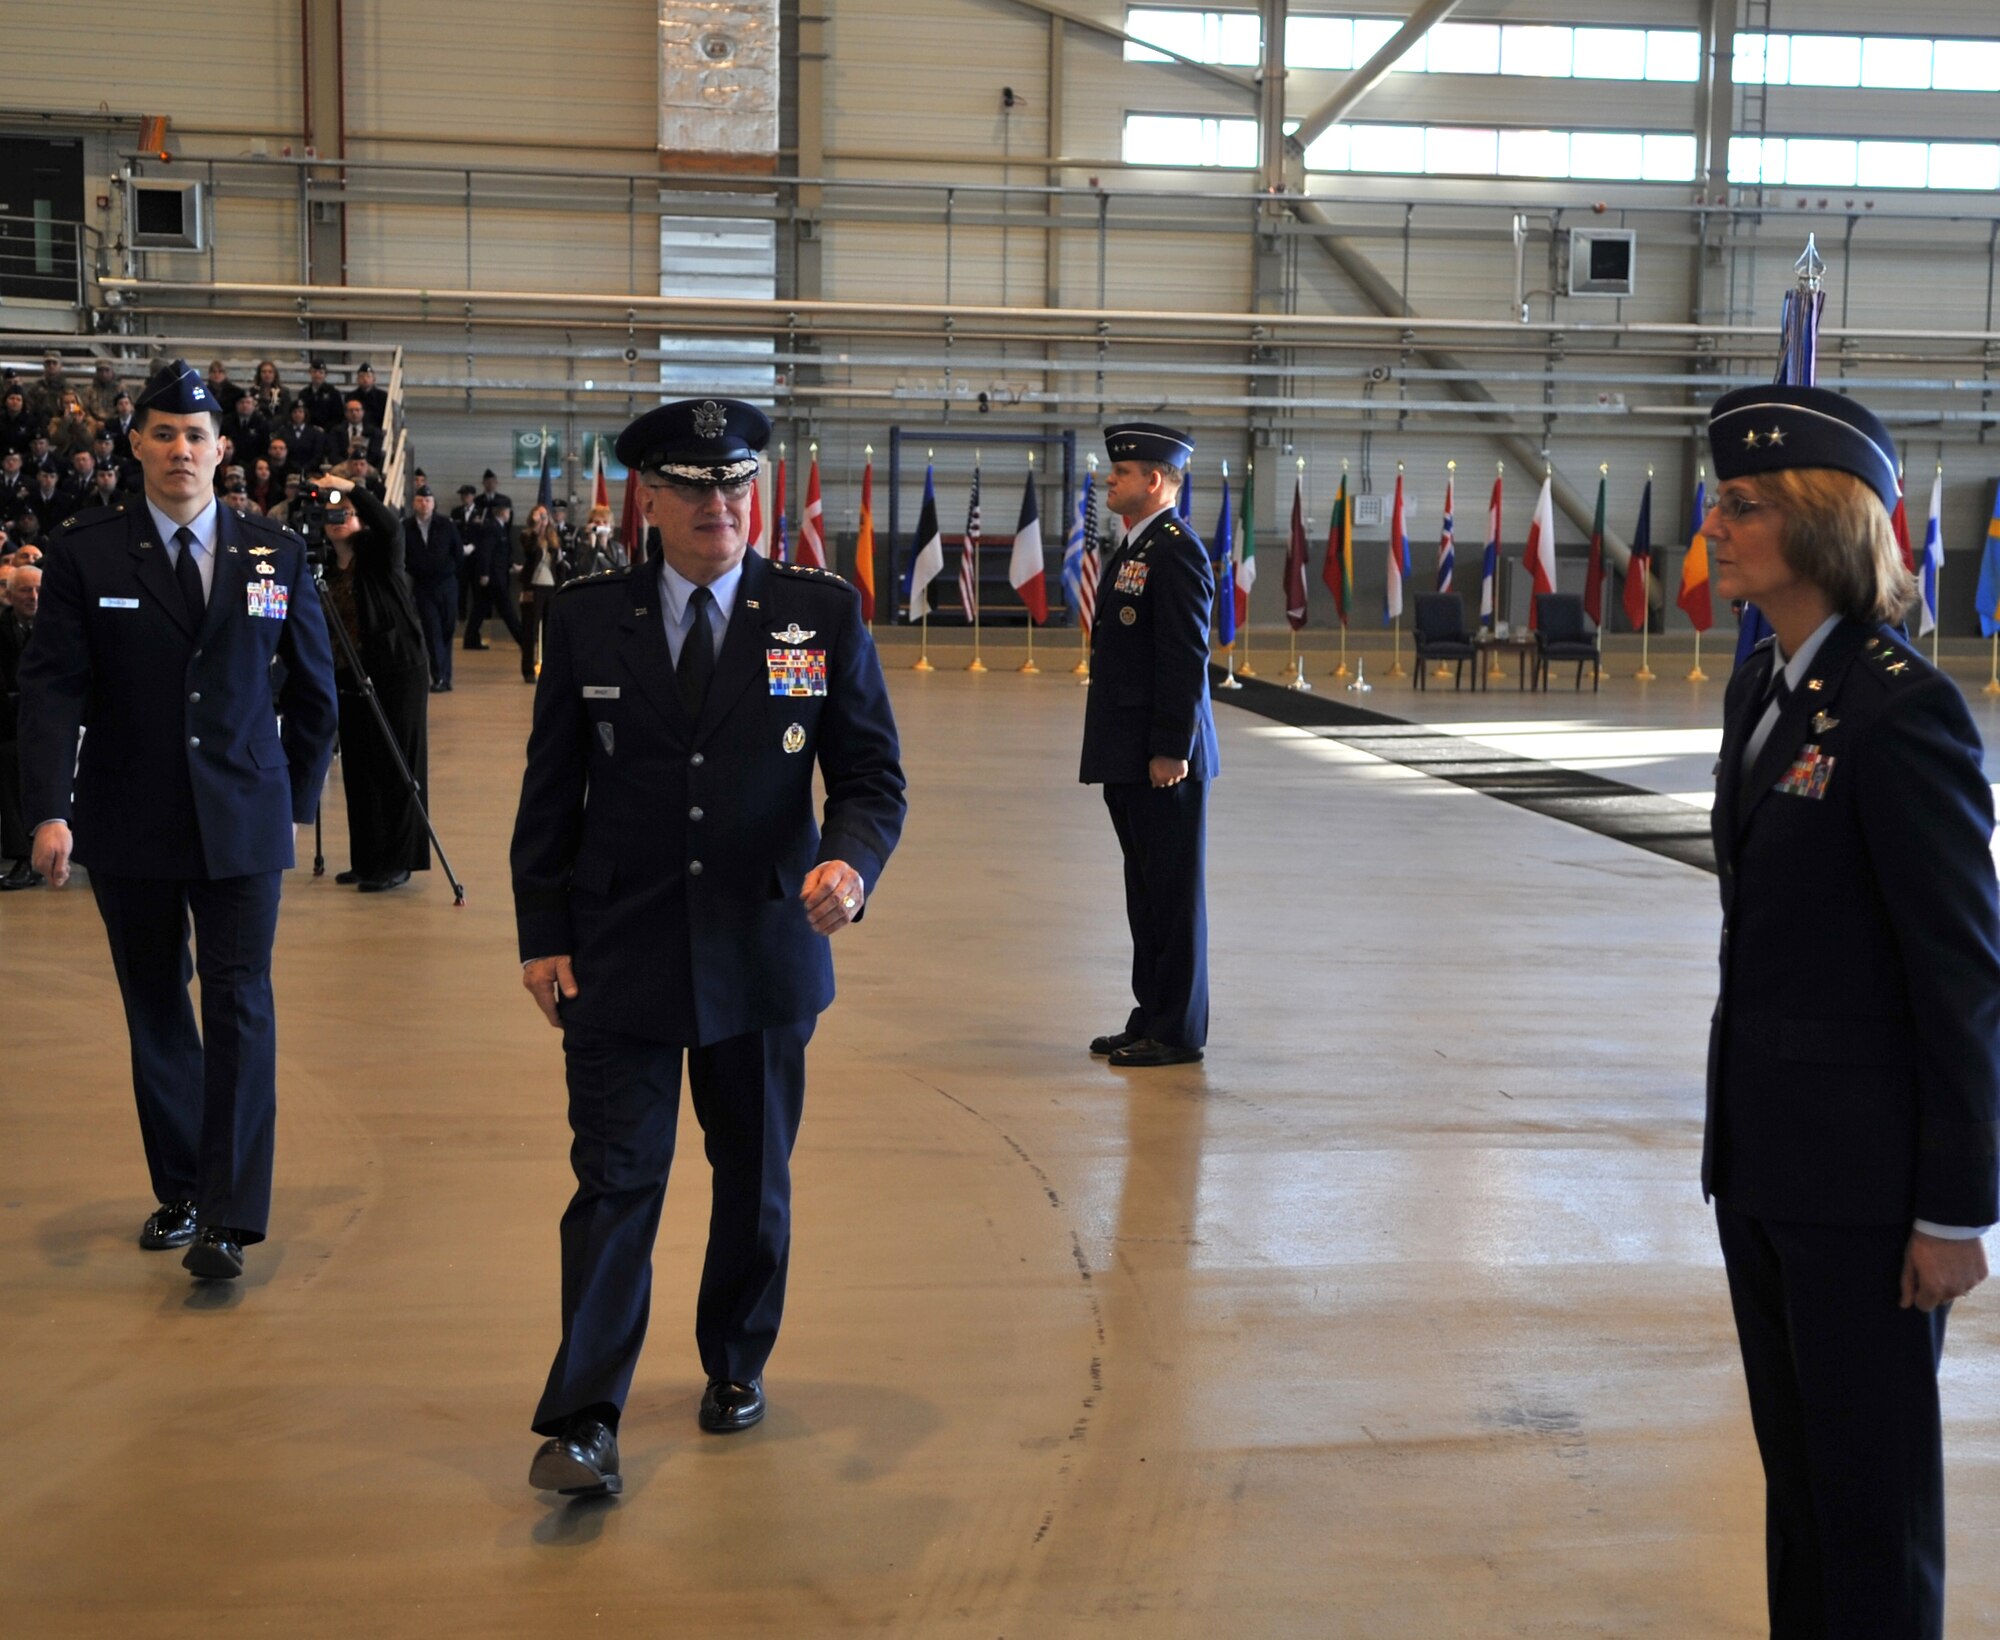 U.S. Air Force Gen. Roger A. Brady, outgoing U.S. Air Forces in Europe commander, gives a last inspection to his Airmen during a change of command ceremony, Ramstein Air Base, Germany, Dec. 13, 2010. Gen. Brady, outgoing USAFE commander, relinquished command during the change of command ceremony after providing command and control for air, space and missile defense for activities in an area of operations covering almost one-fifth of the globe which included 51 countries in Europe, Asia, the Middle East, and the Arctic and Atlantic oceans. (U.S. Air Force photo by Senior Airman Caleb Pierce)